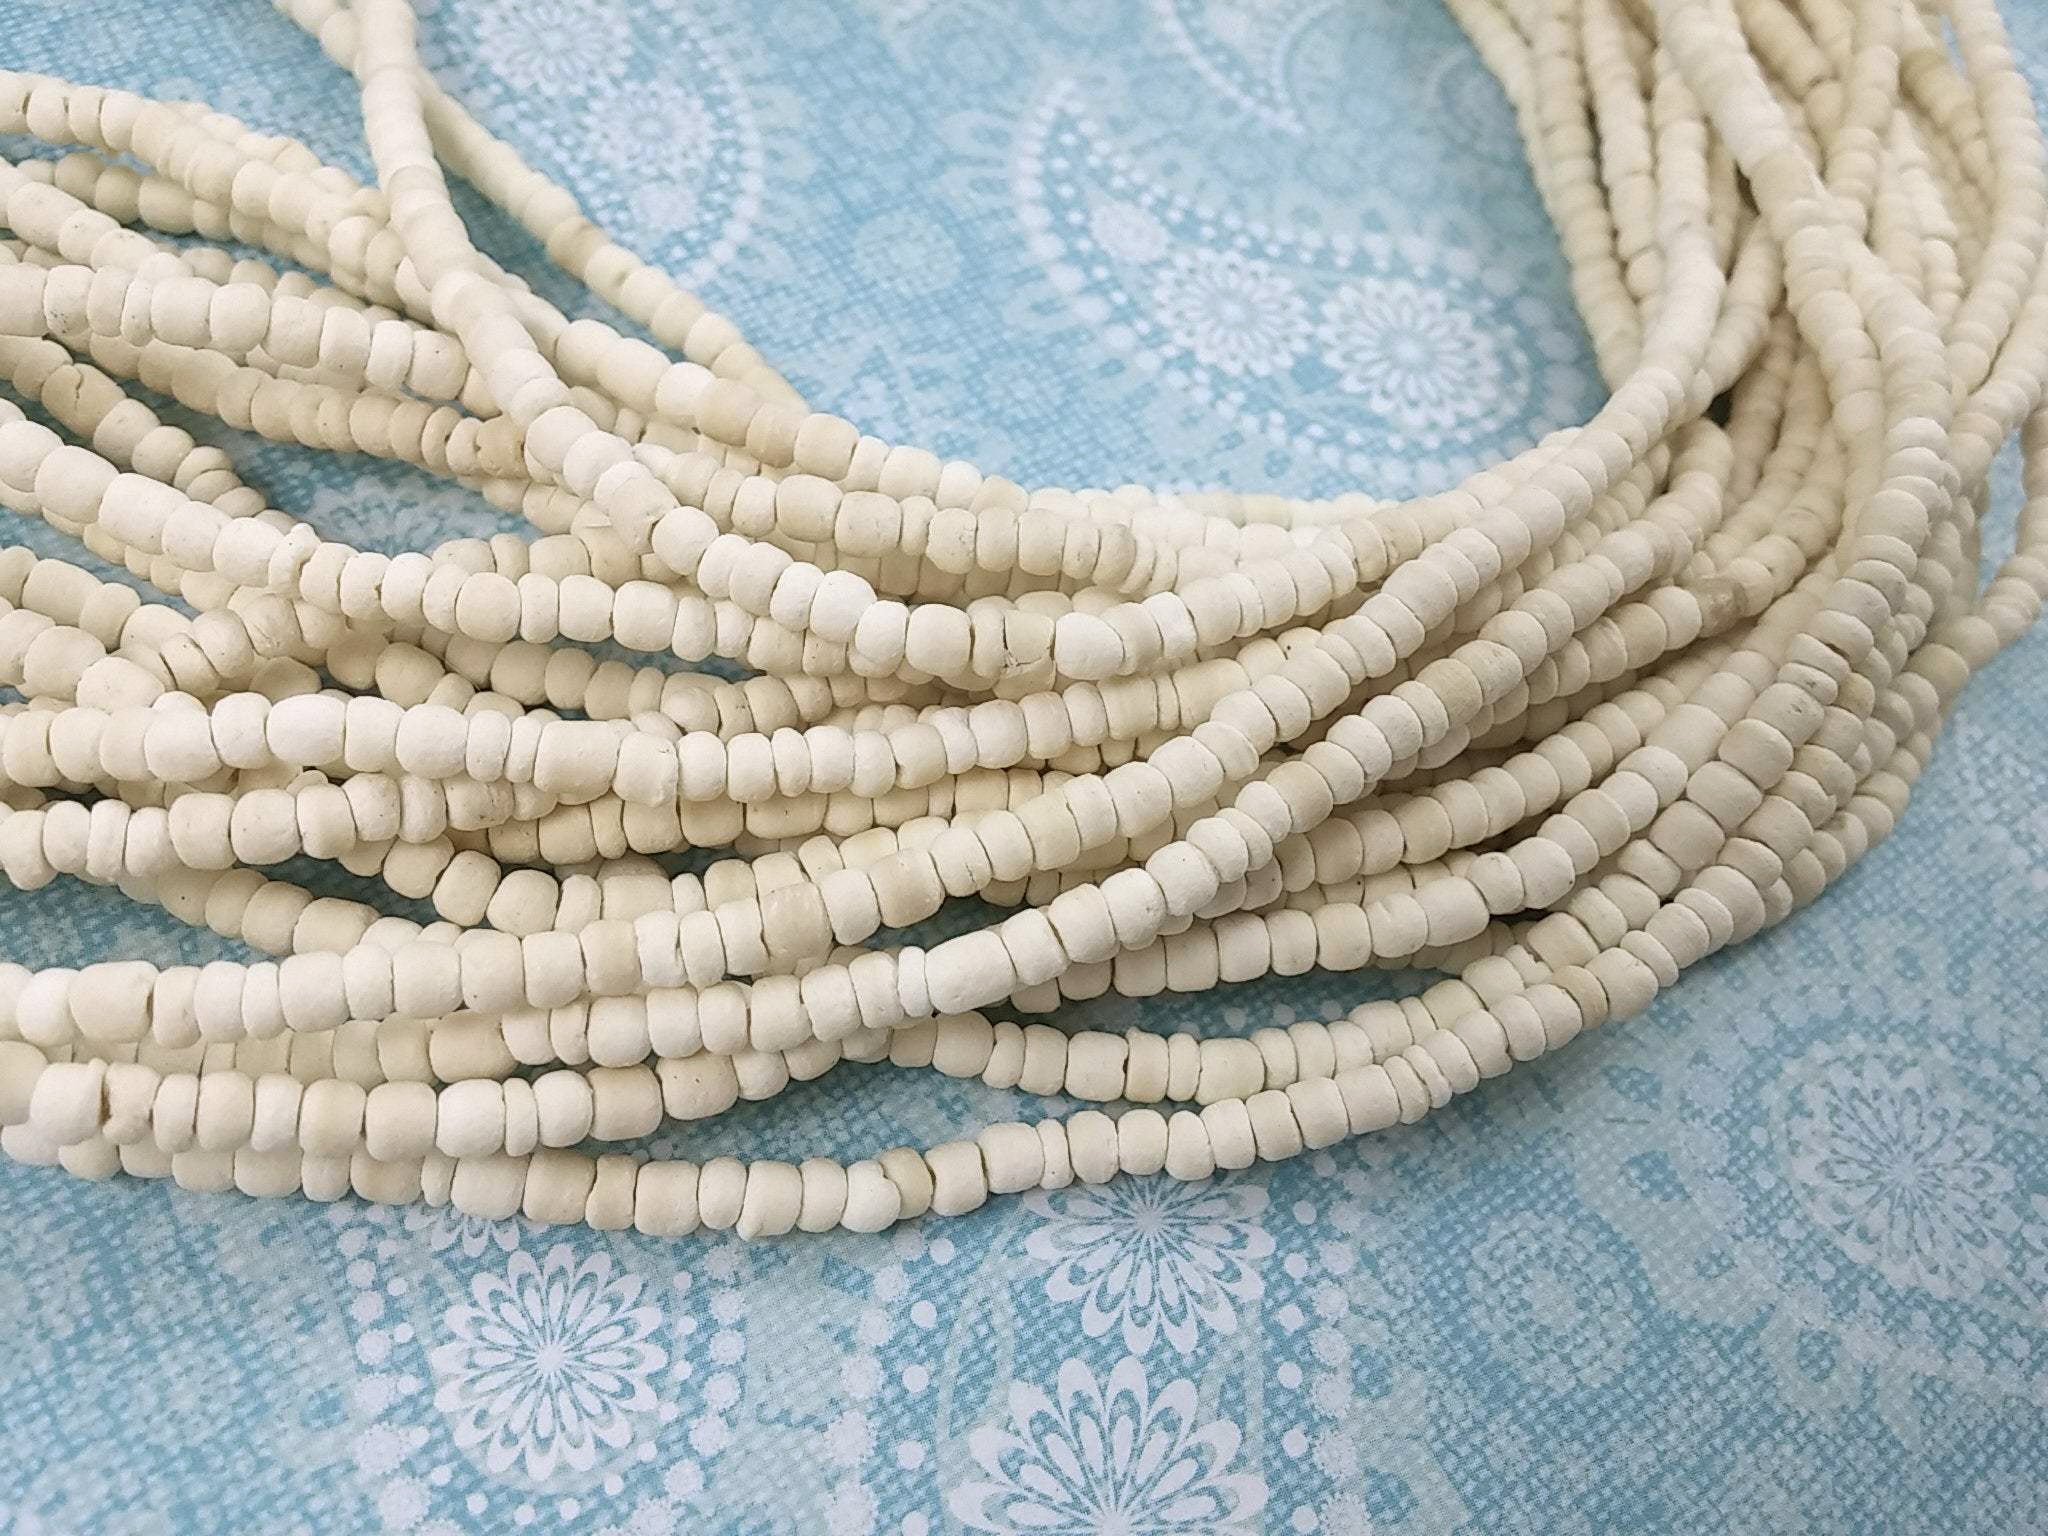 Tiny bleach white coconut beads 2-3mm